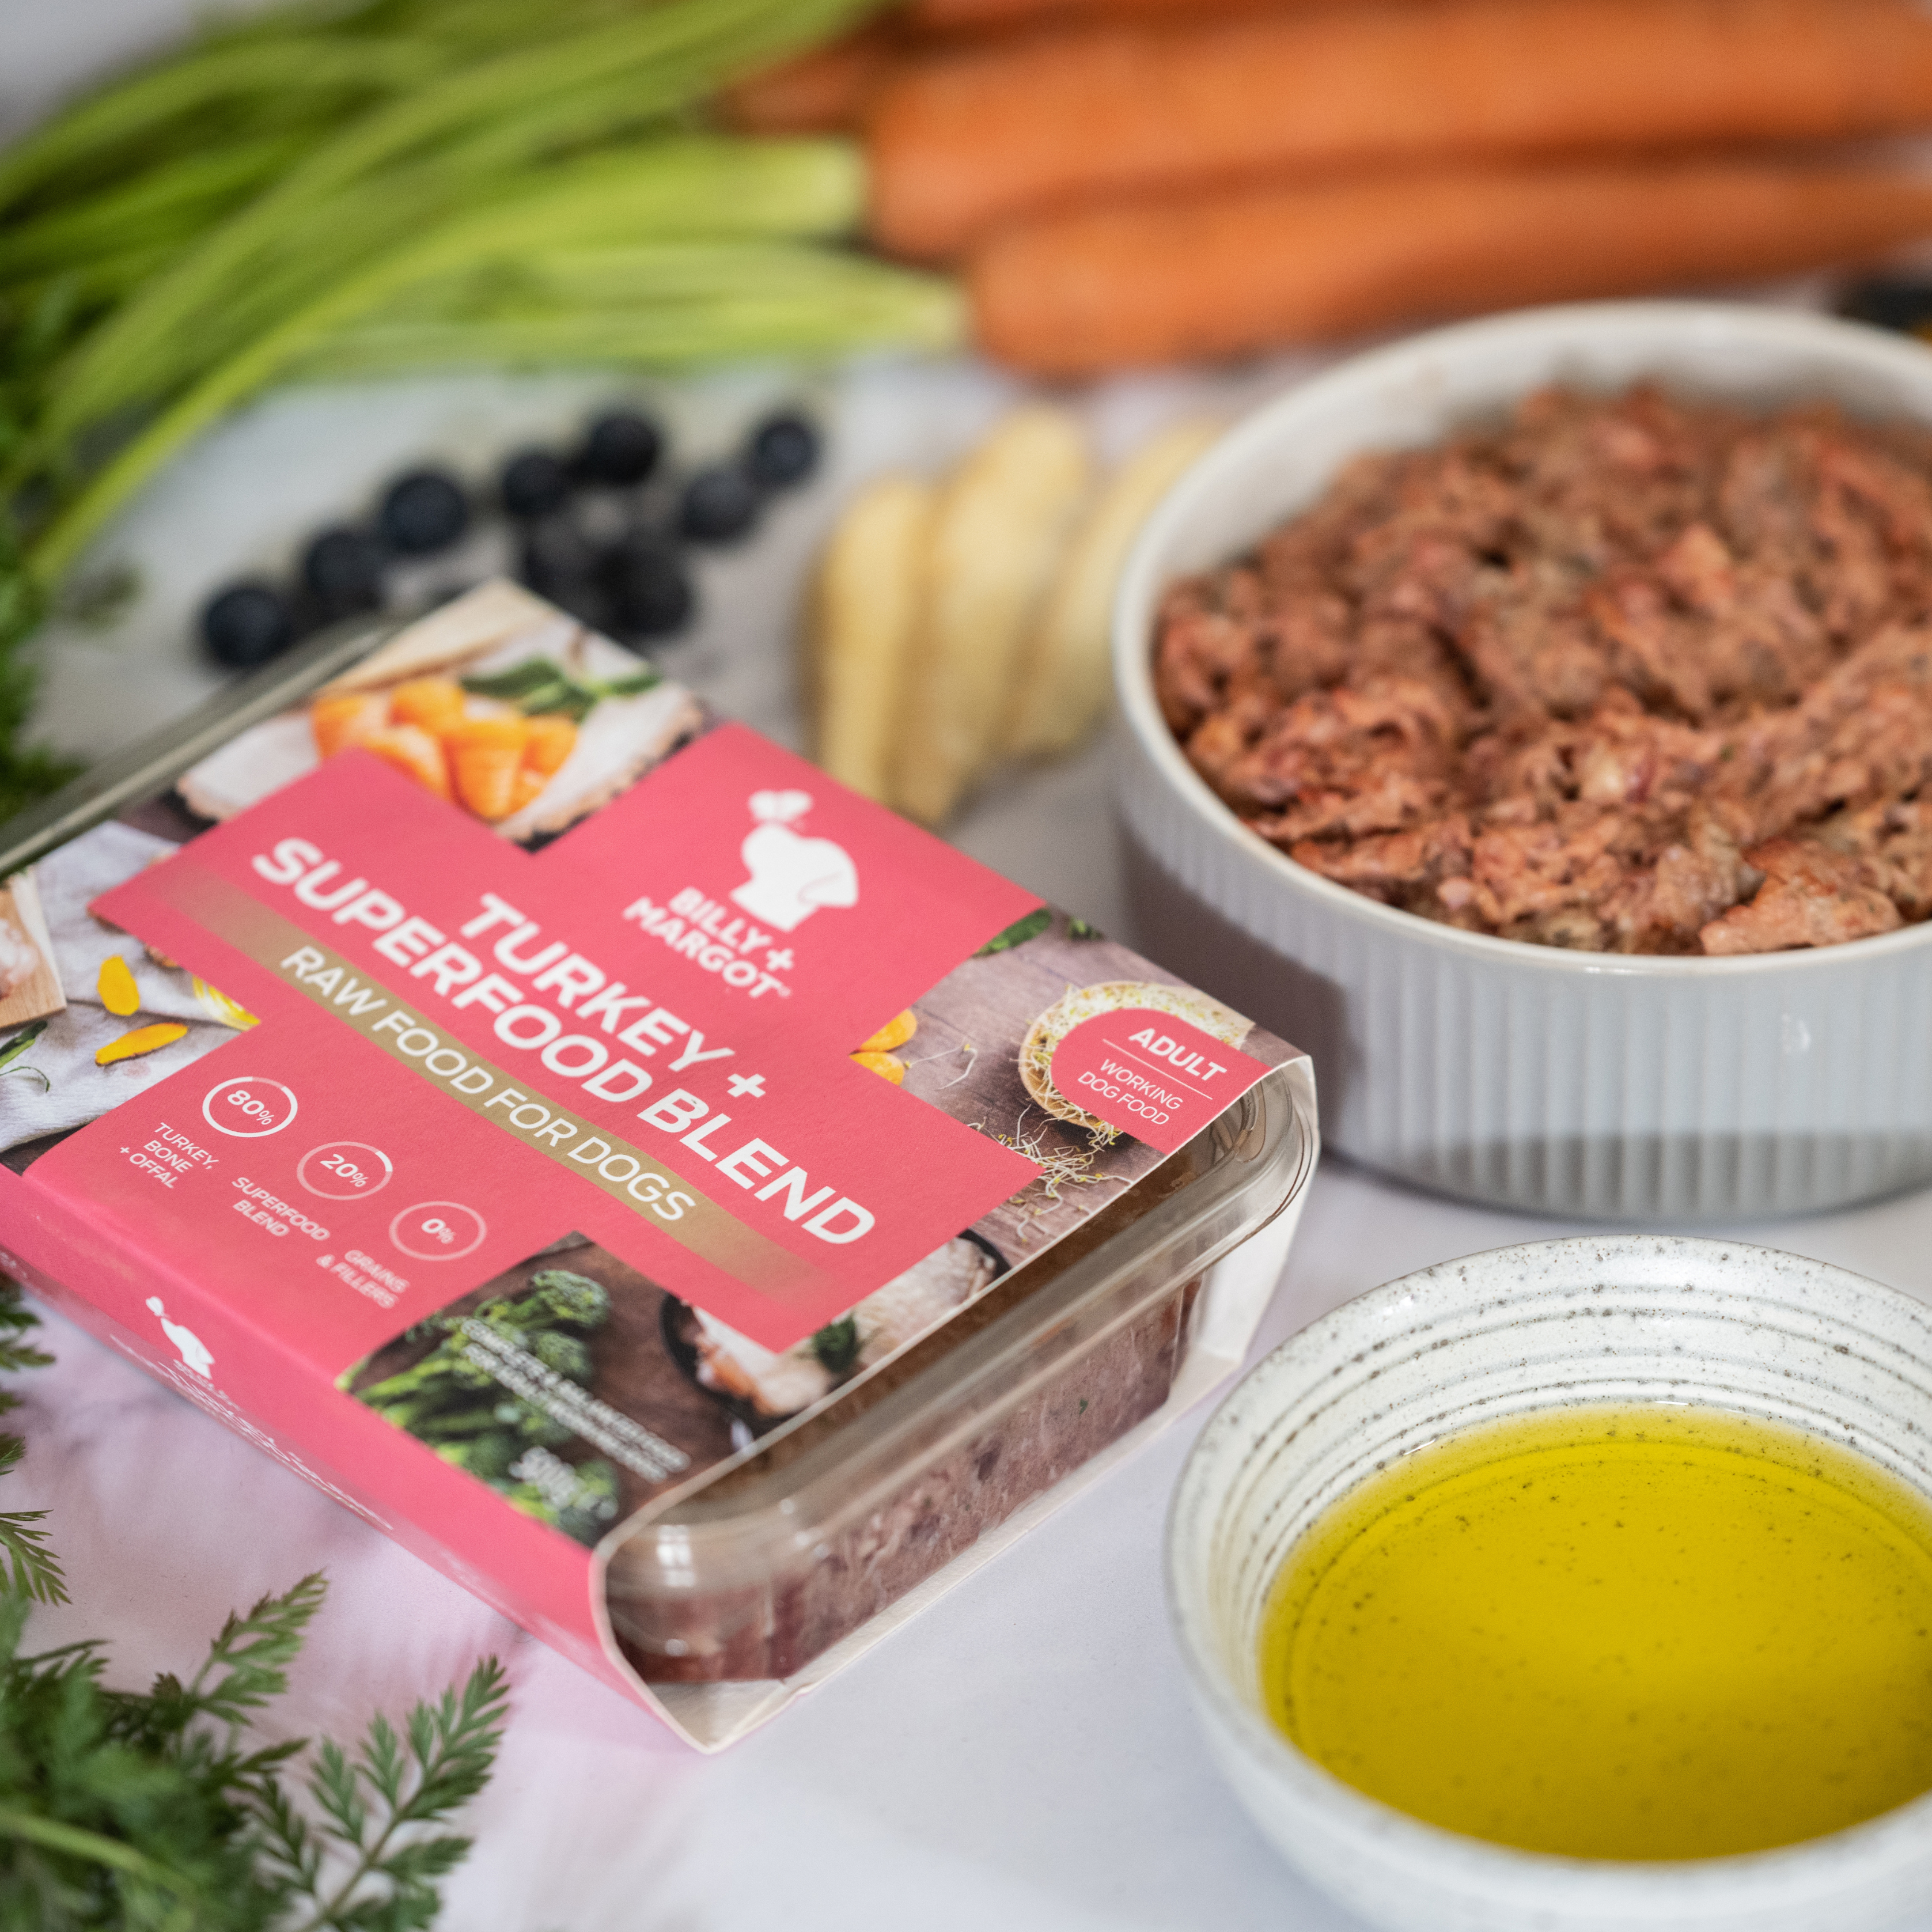 Natural fresh frozen raw dog food. Ingredients include human-grade turkey, bone, offal, vegetables and our superfood blend. Grain free and nutritionally complete and balanced.